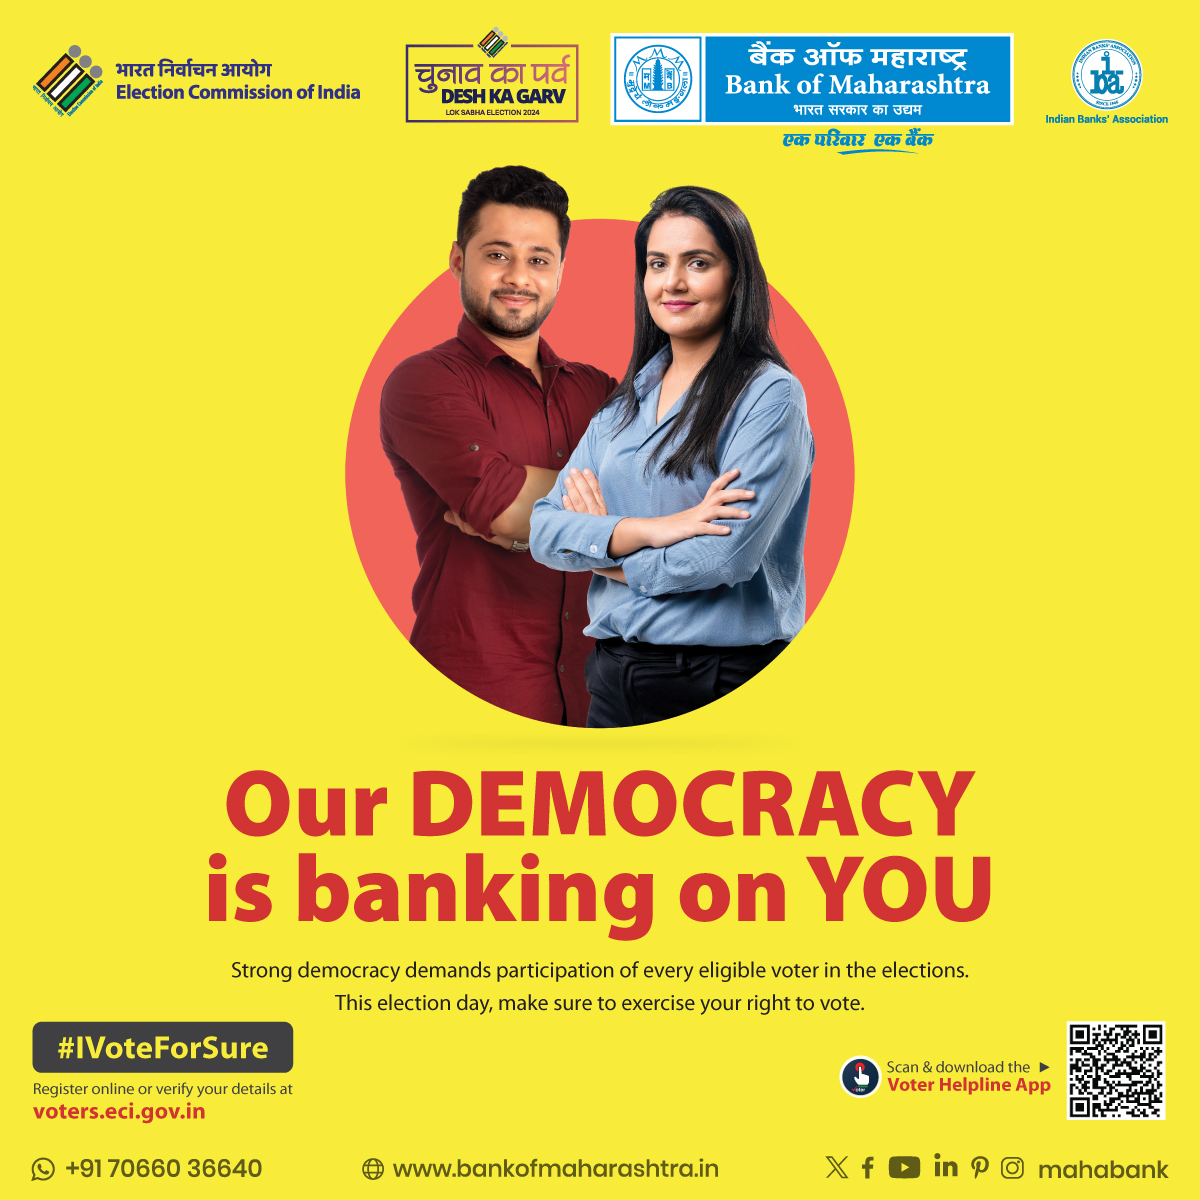 Our Democracy banks on you! Every single vote is crucial in strengthening our democracy. Seize the opportunity to create a meaningful impact this election day.

#BankofMaharashtra #Mahabank #EveryVoteCounts #SmartVoter #IVoteForSure